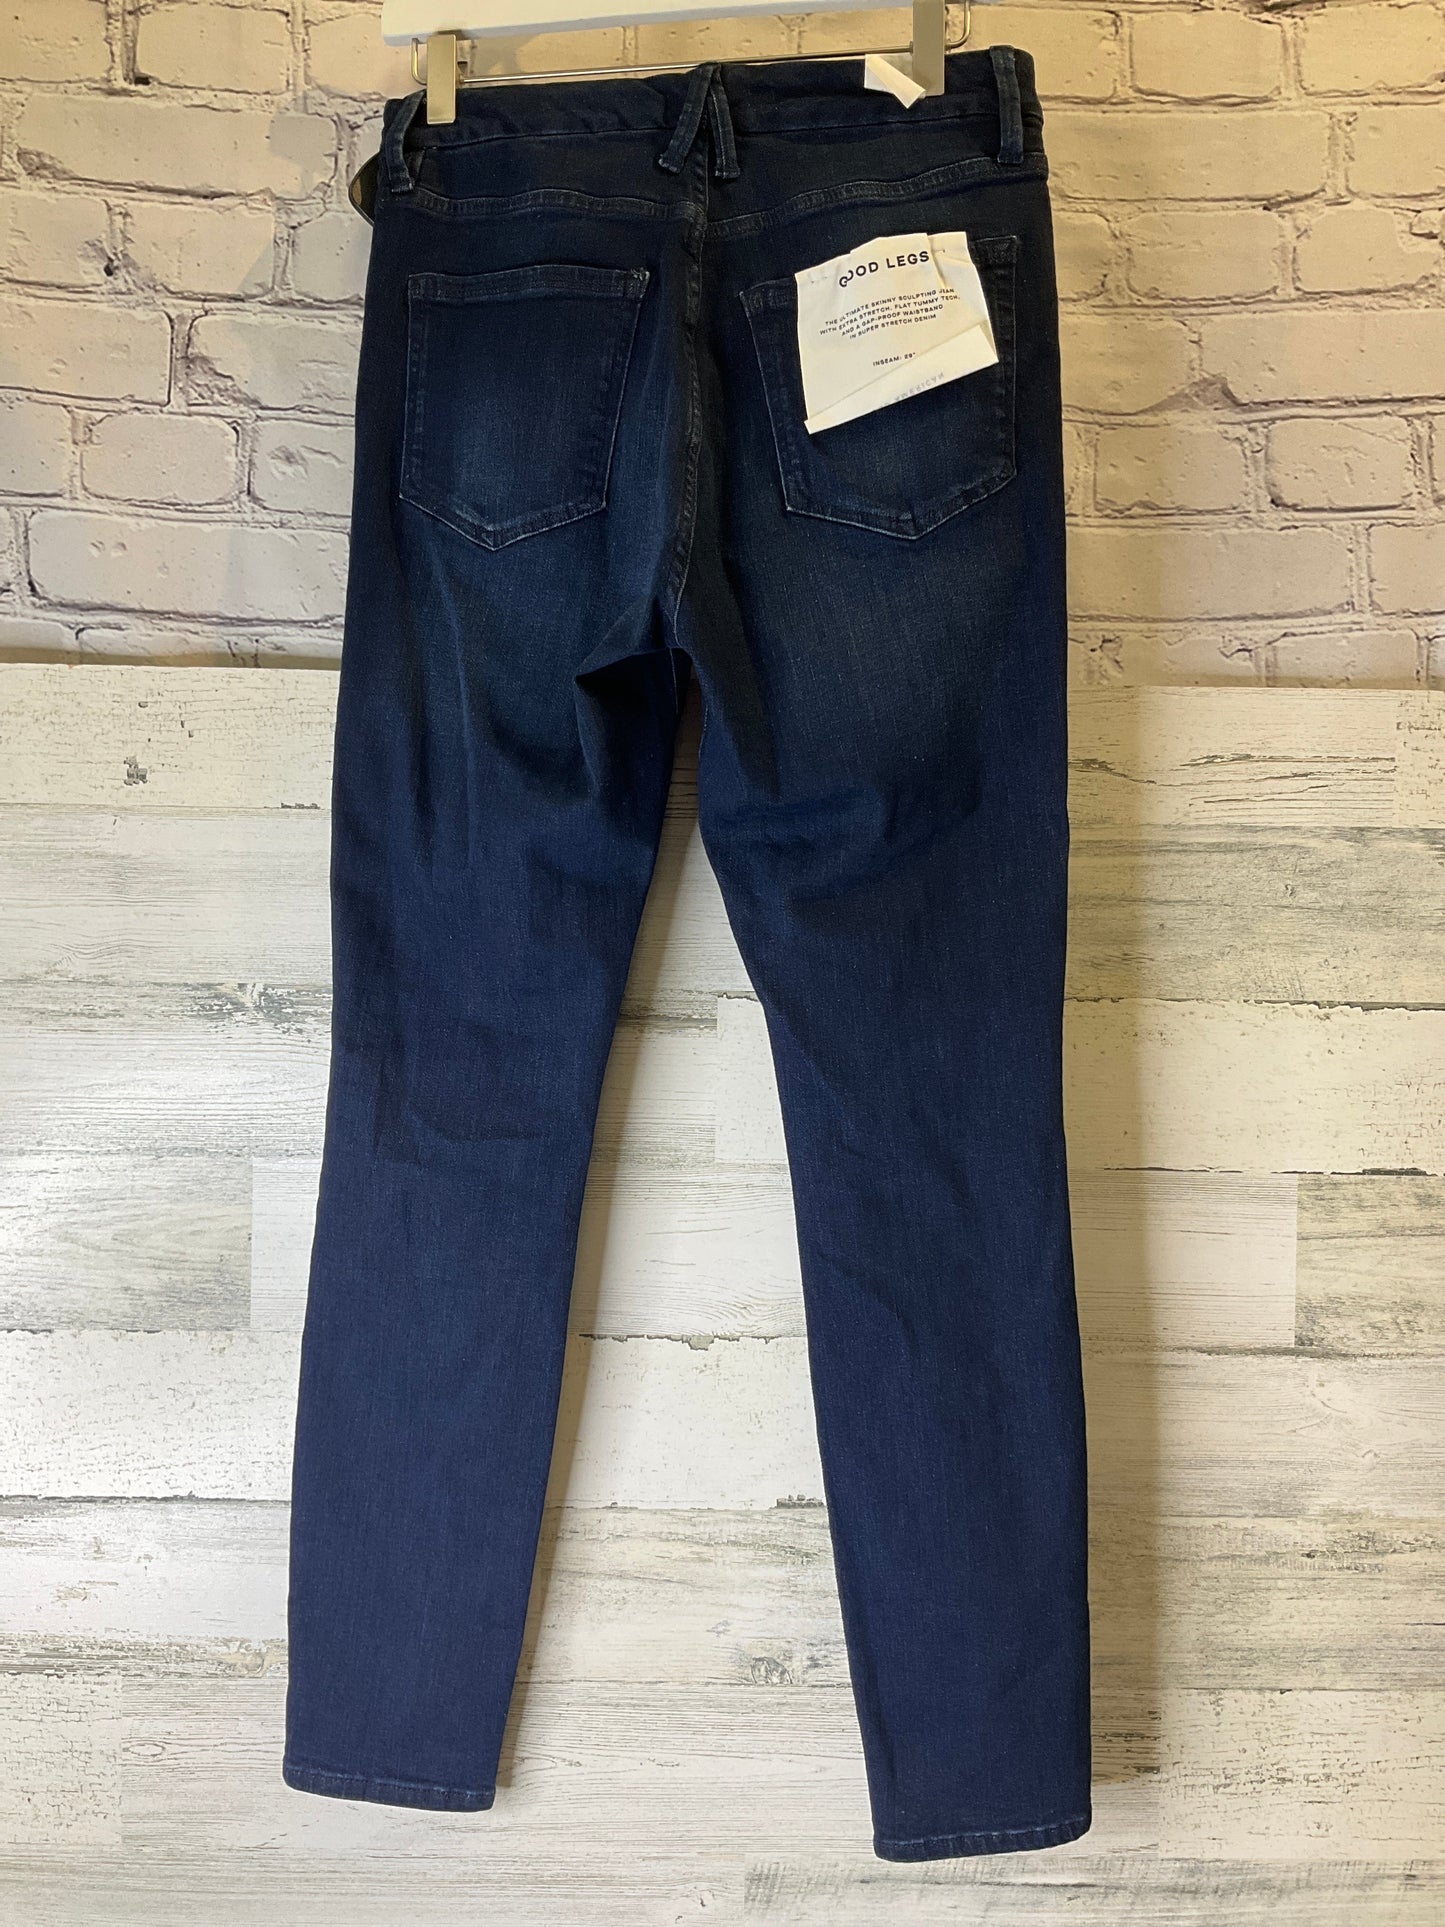 Jeans Skinny By Good American  Size: 10